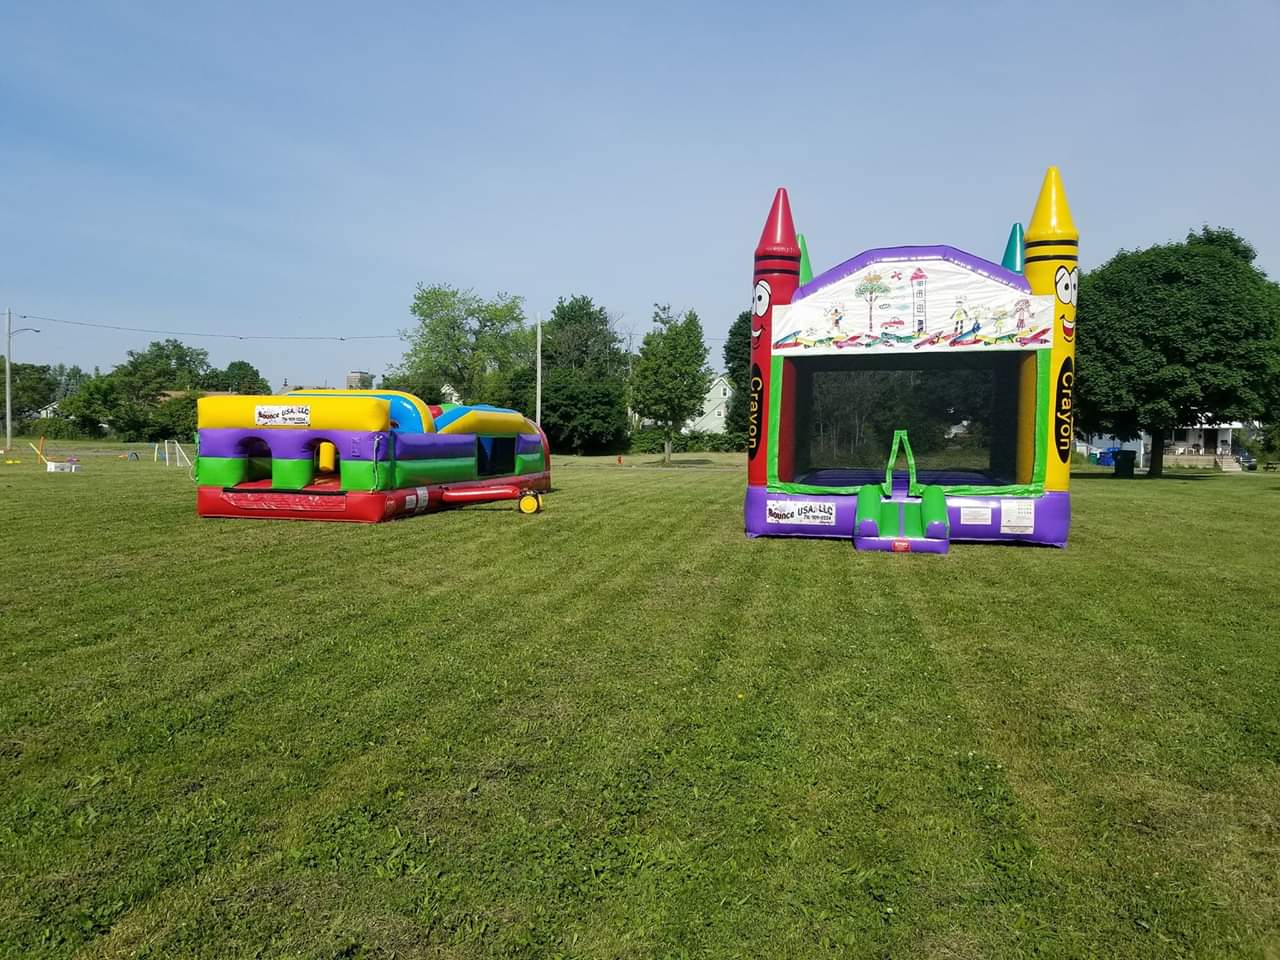 Obstacle course and bounce house ready to be used for a school event